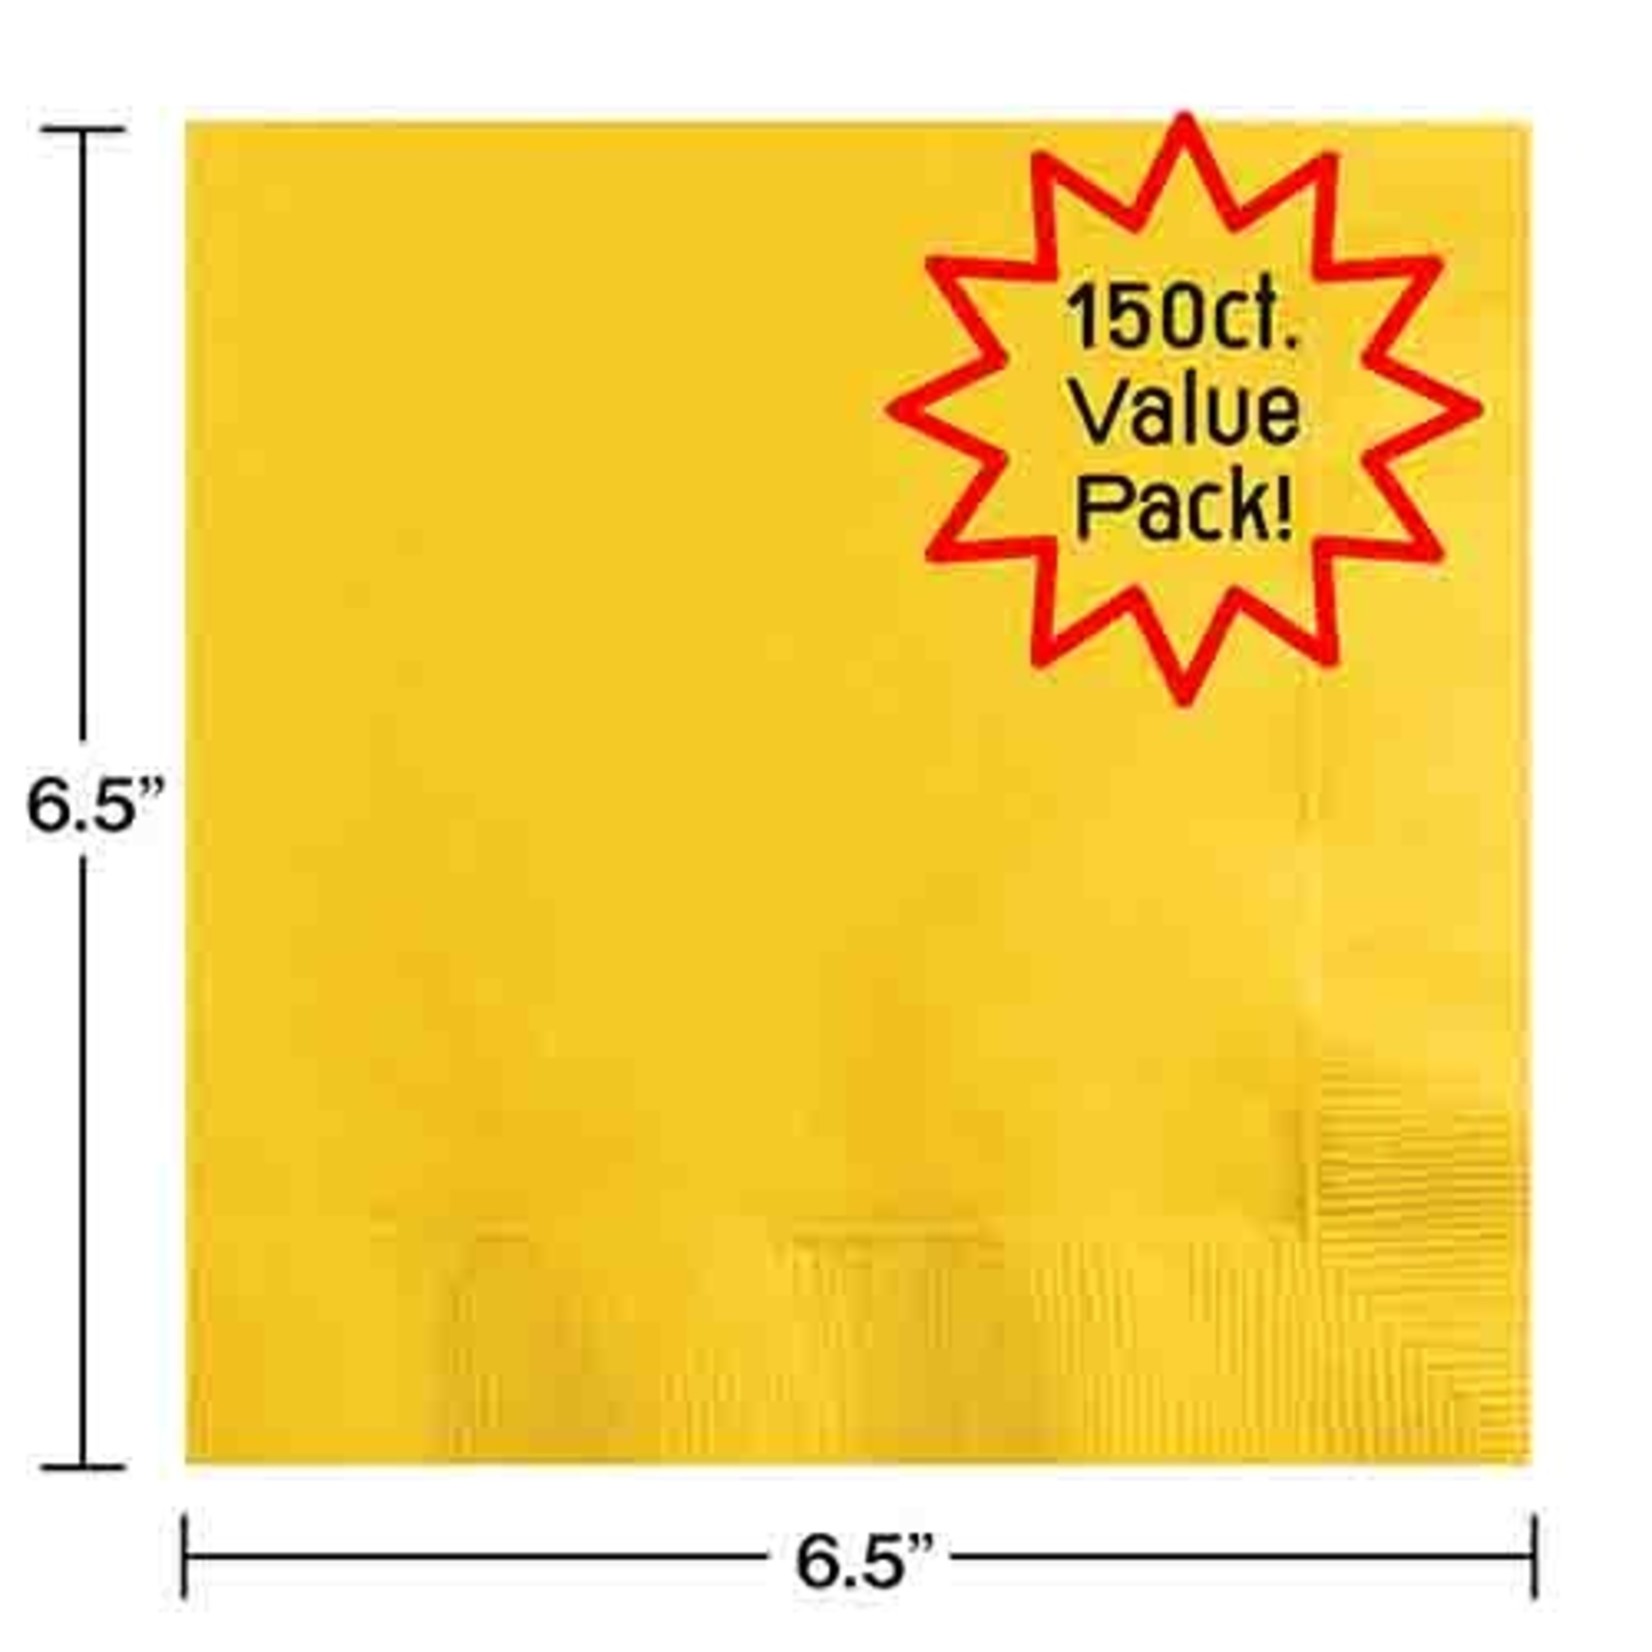 Touch of Color School Bus Yellow 2-Ply Lunch Napkins - 150ct.